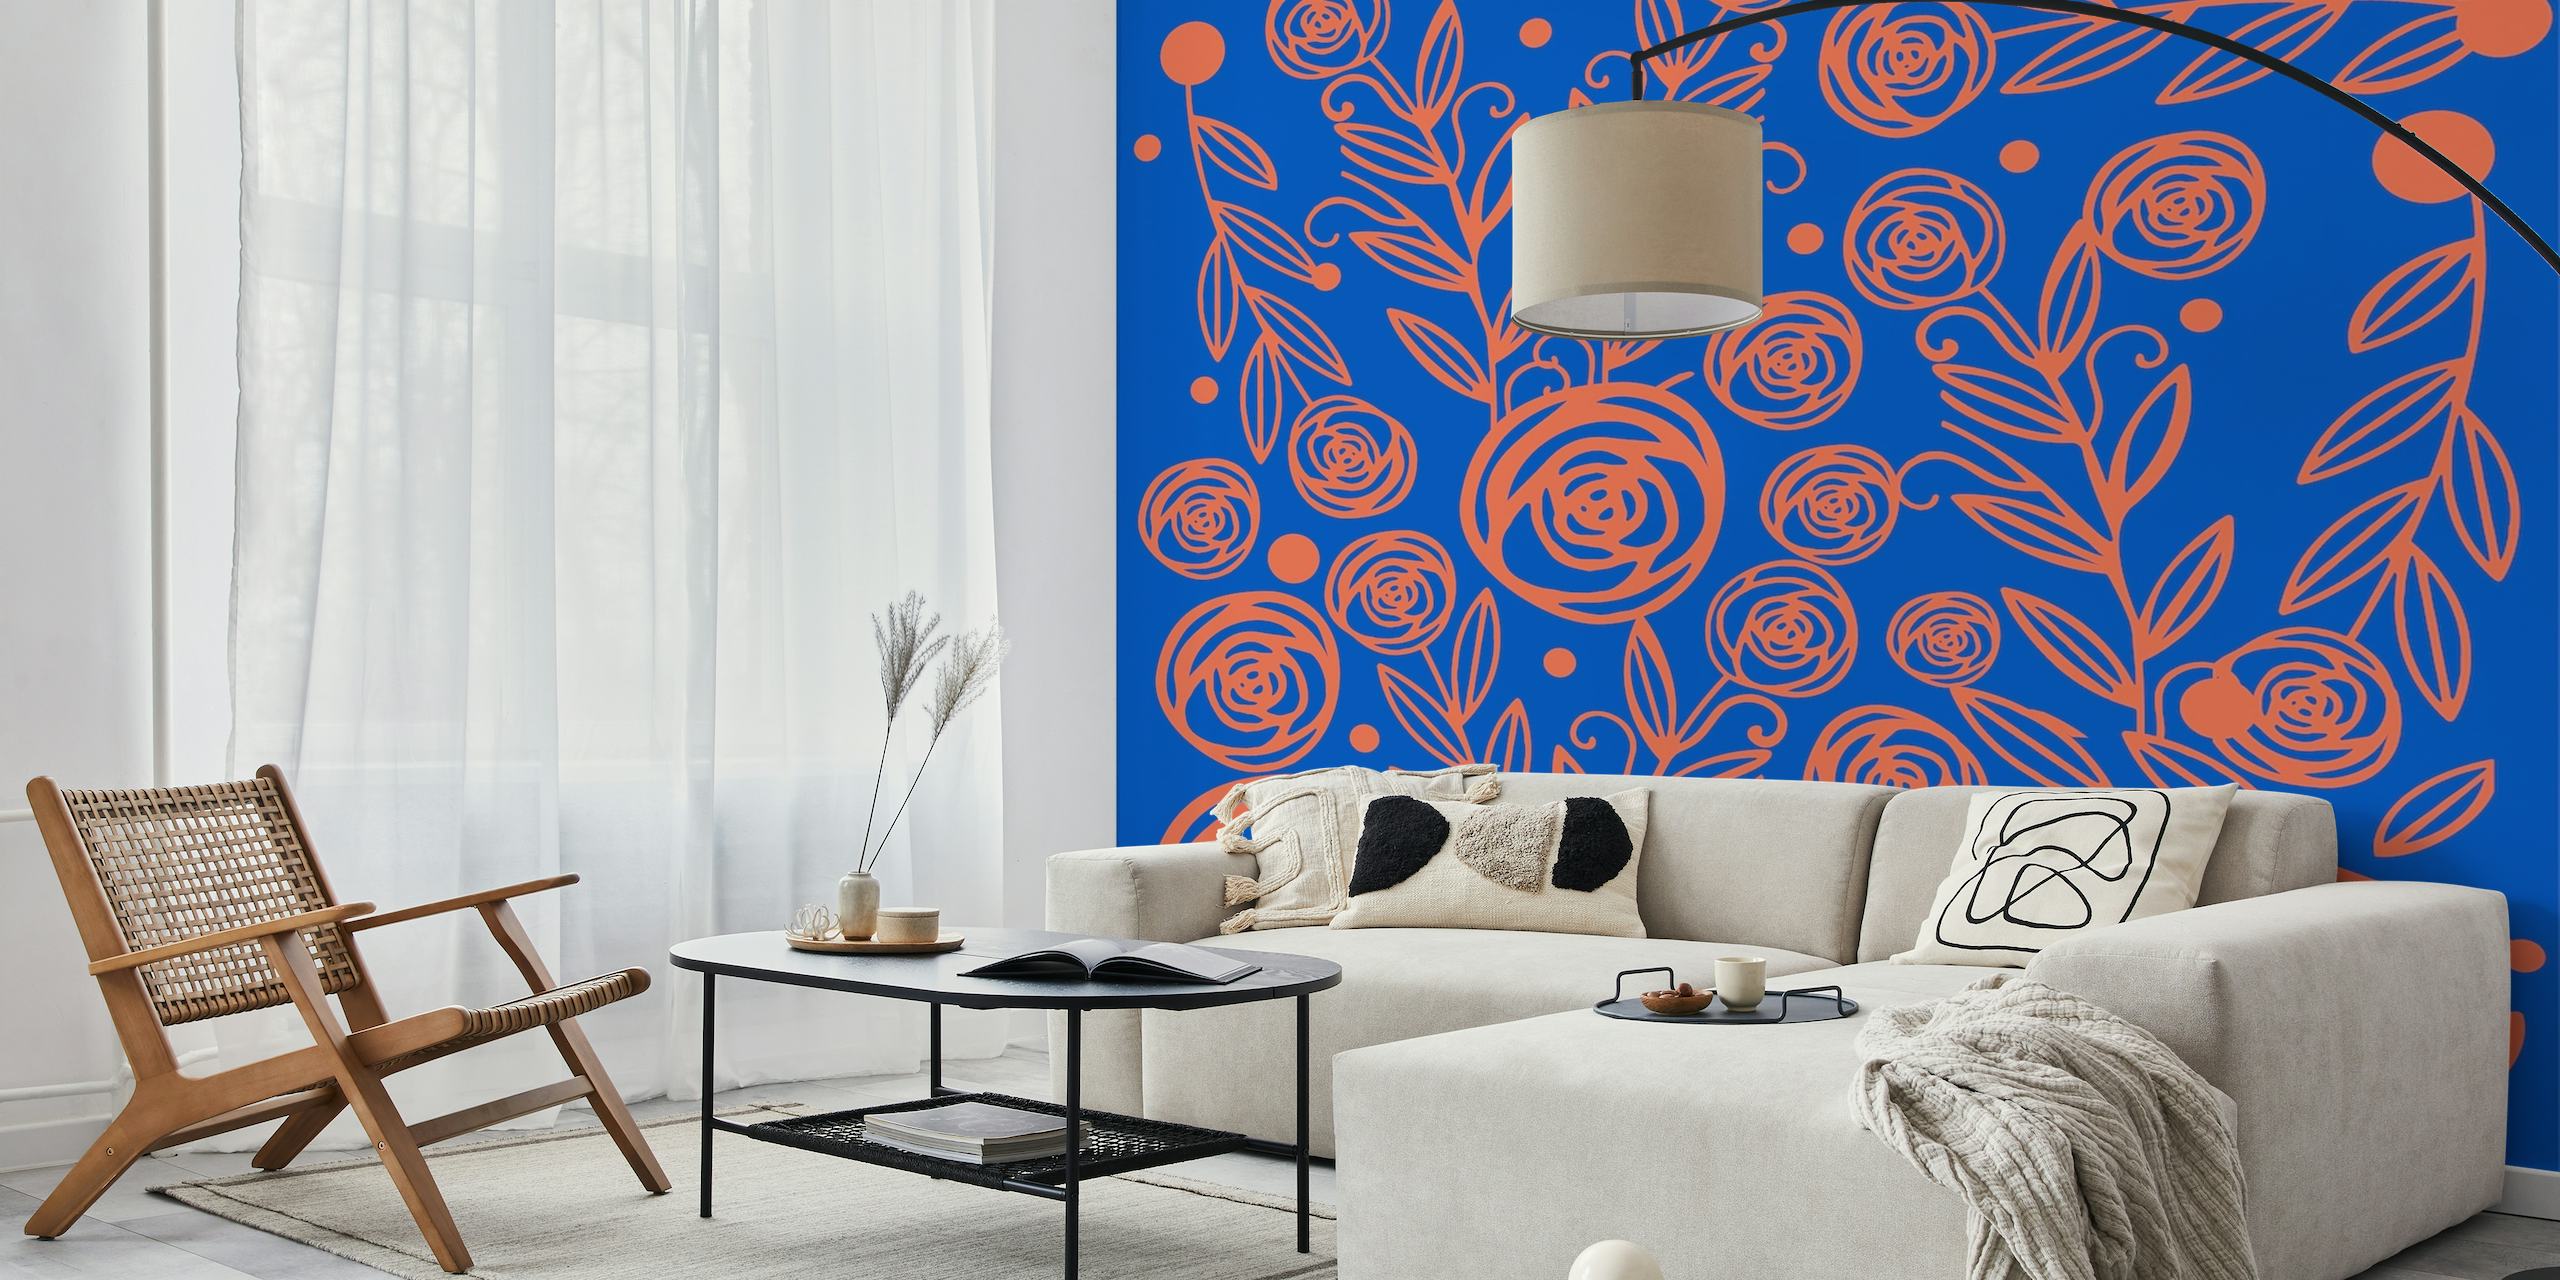 Hand-drawn rose garden wall mural with warm tones on blue background